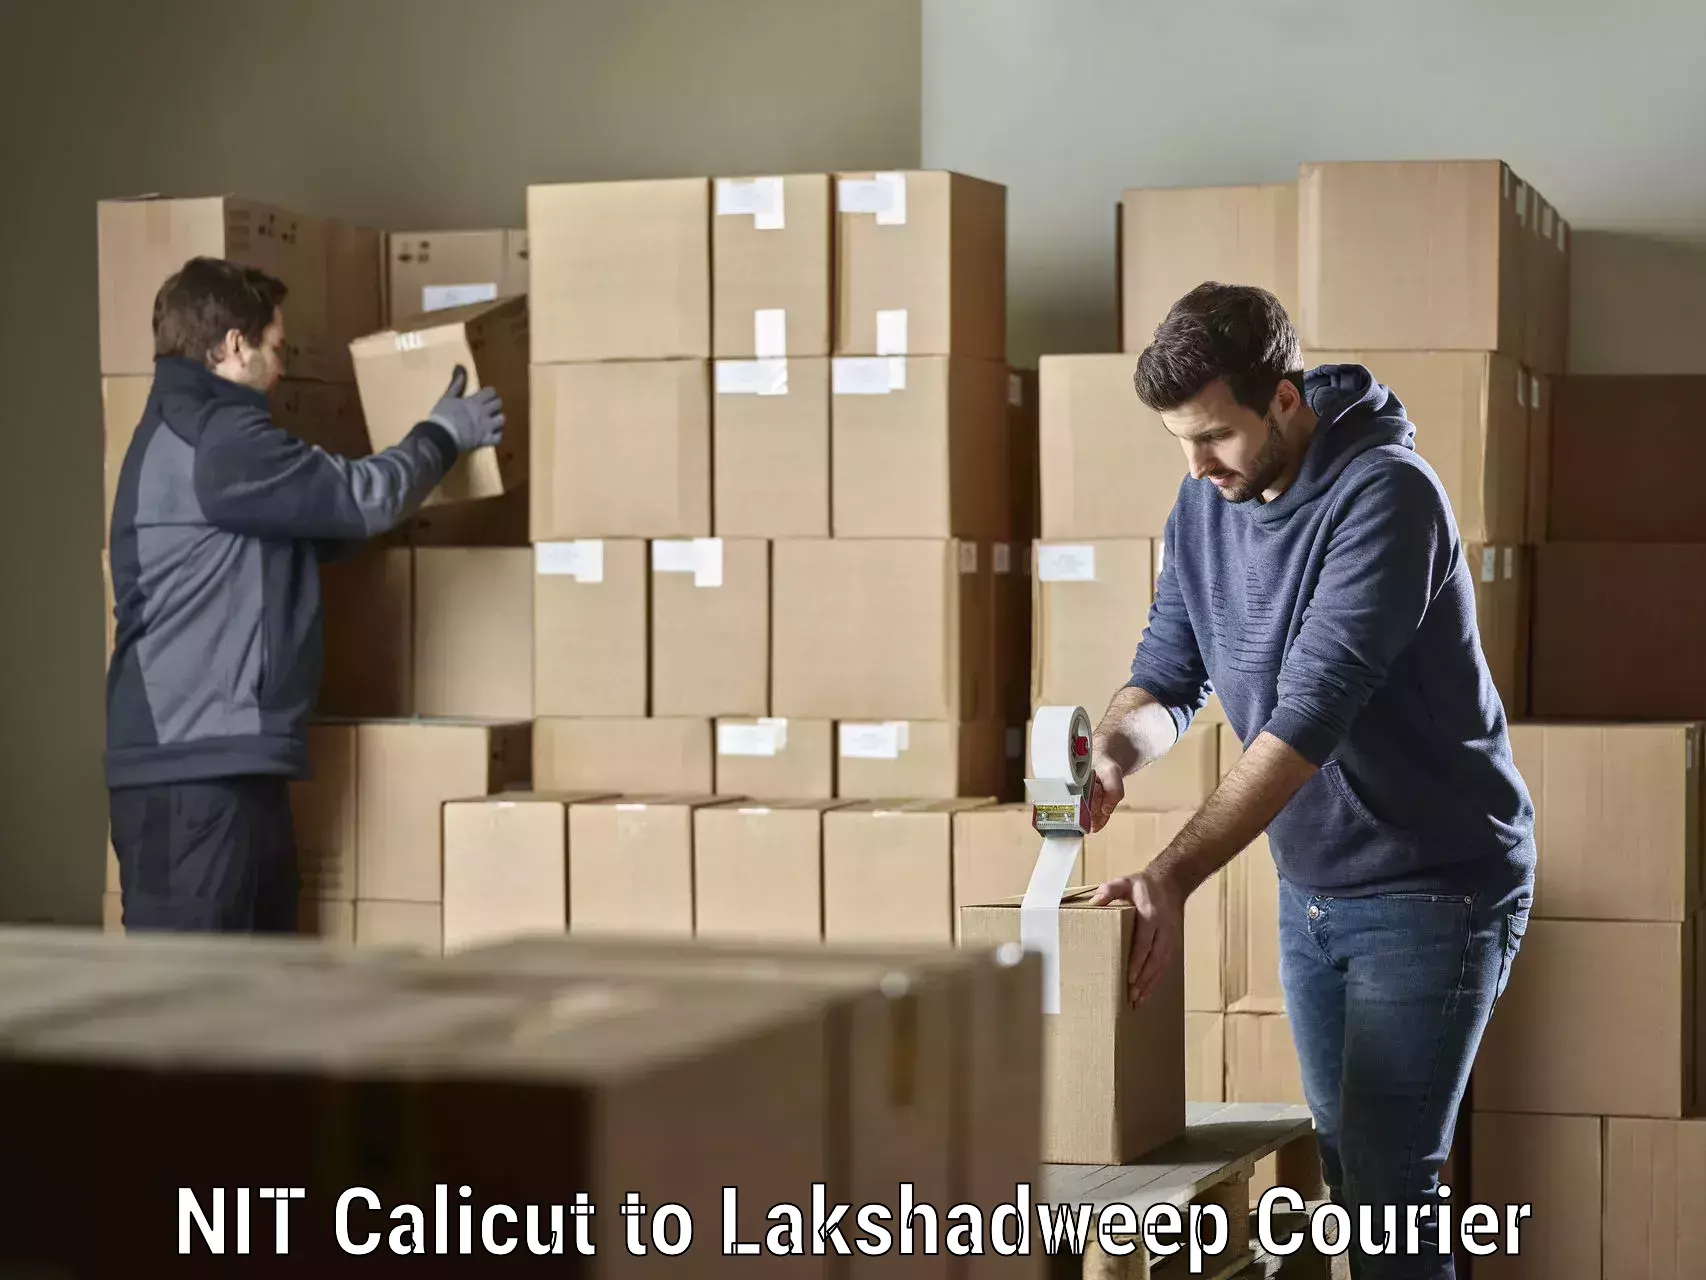 Professional courier services NIT Calicut to Lakshadweep